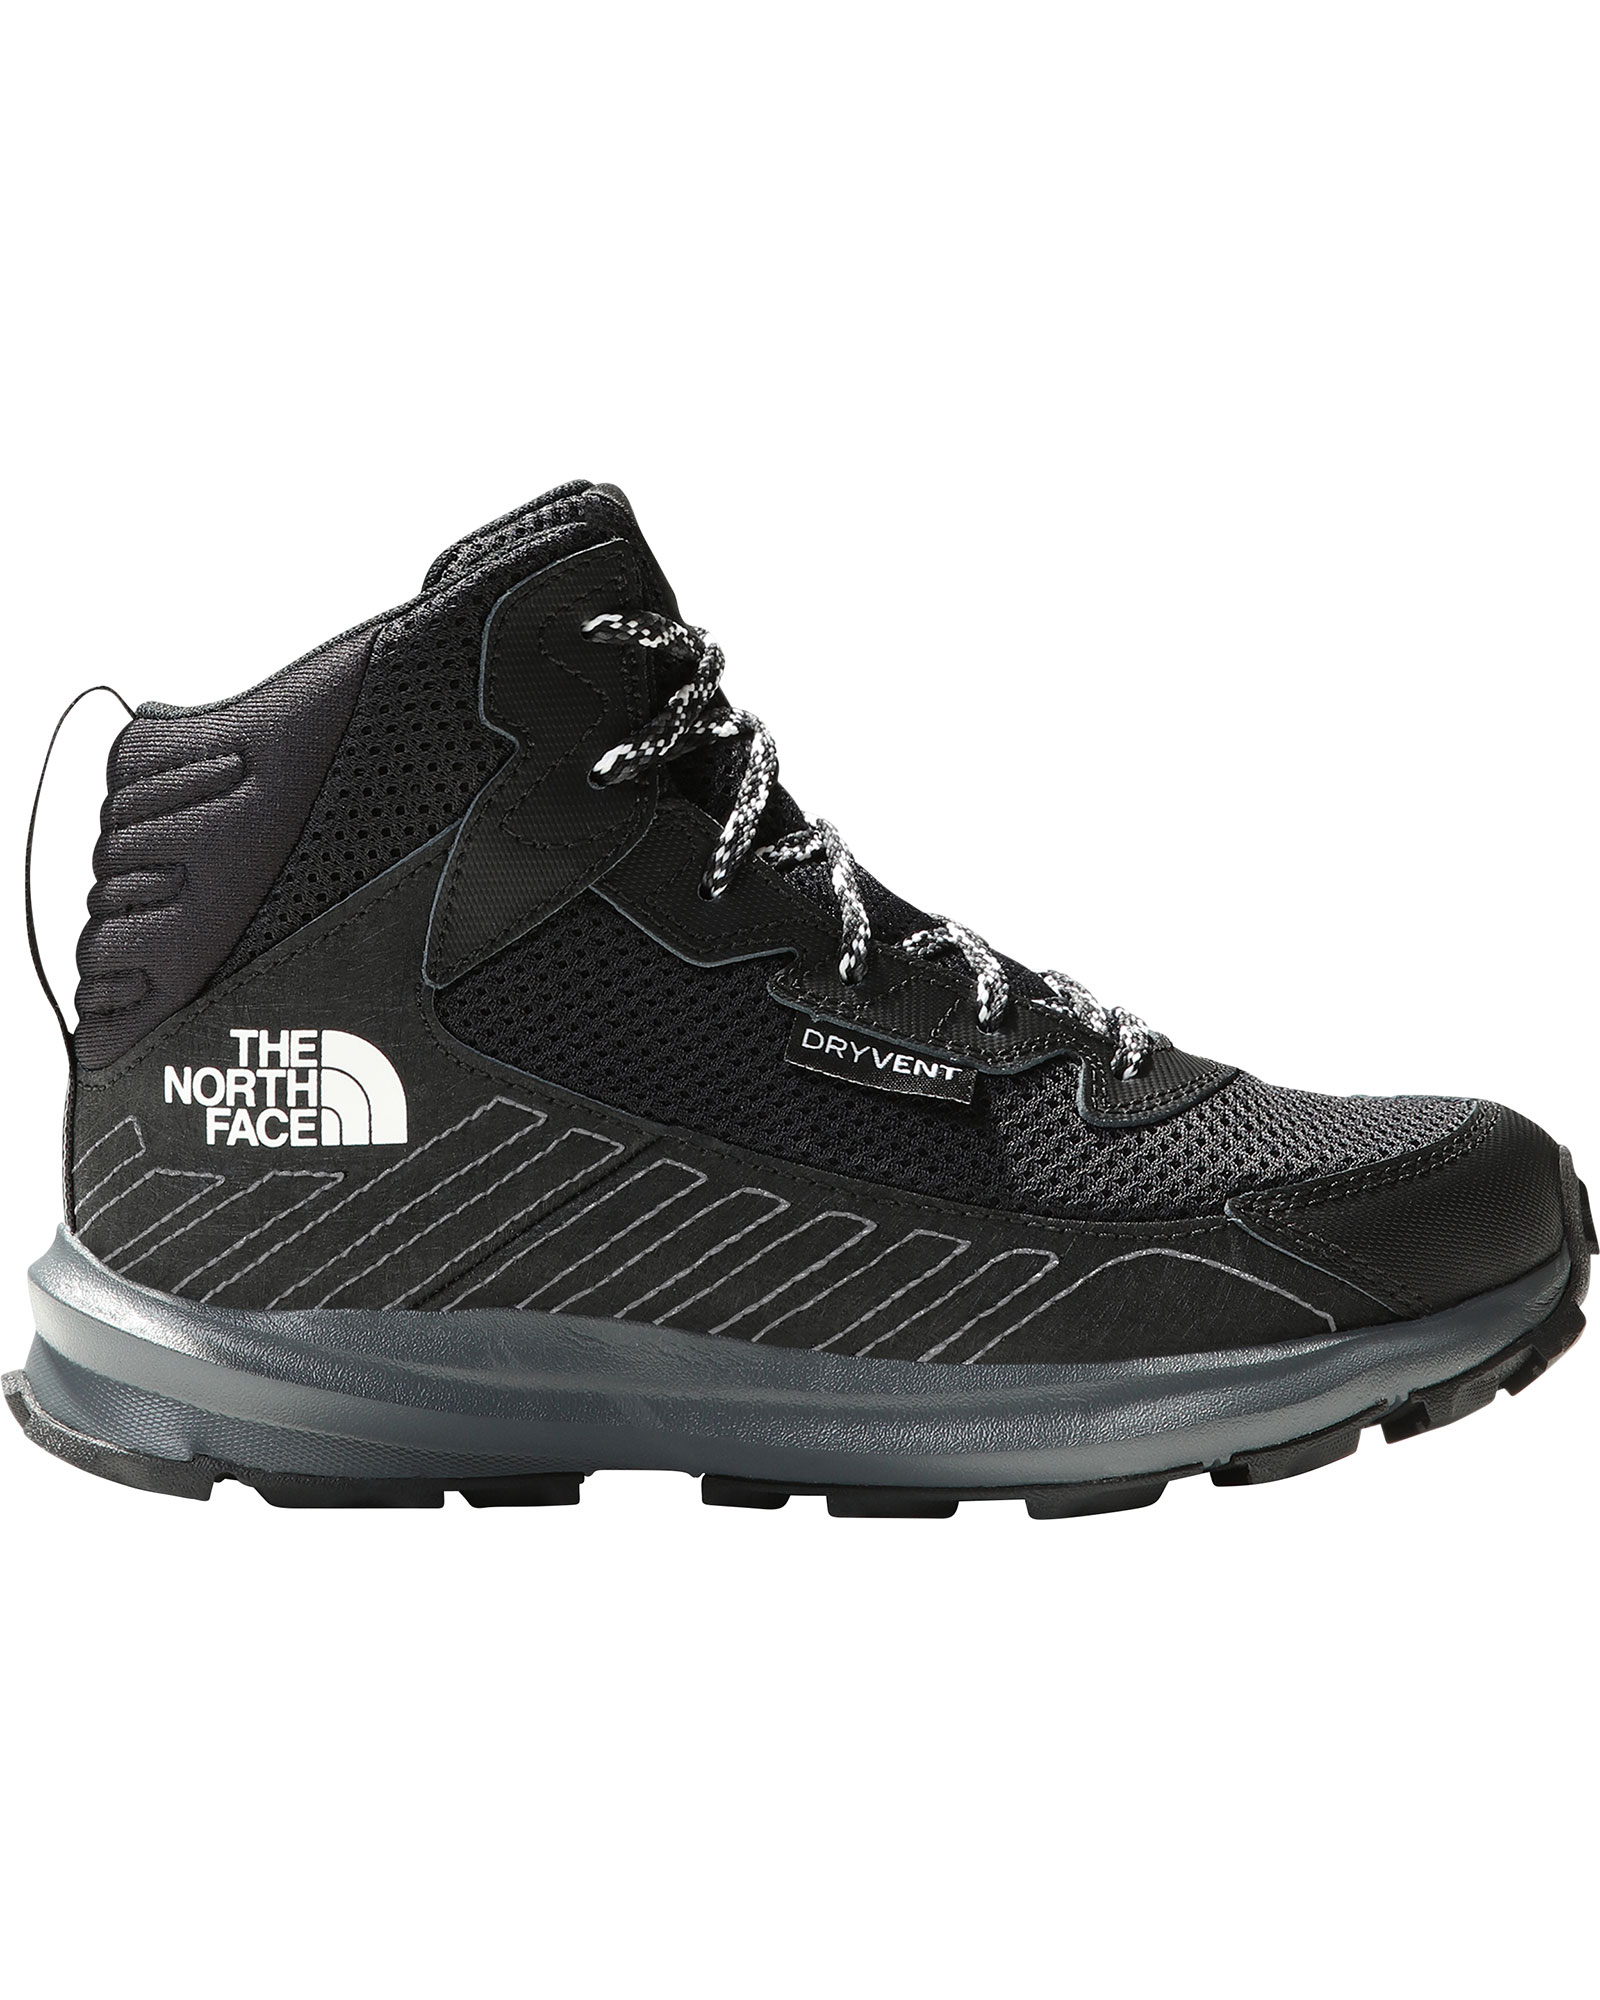 The North Face Youth Fastpack Hiker Mid Kids Waterproof Boots